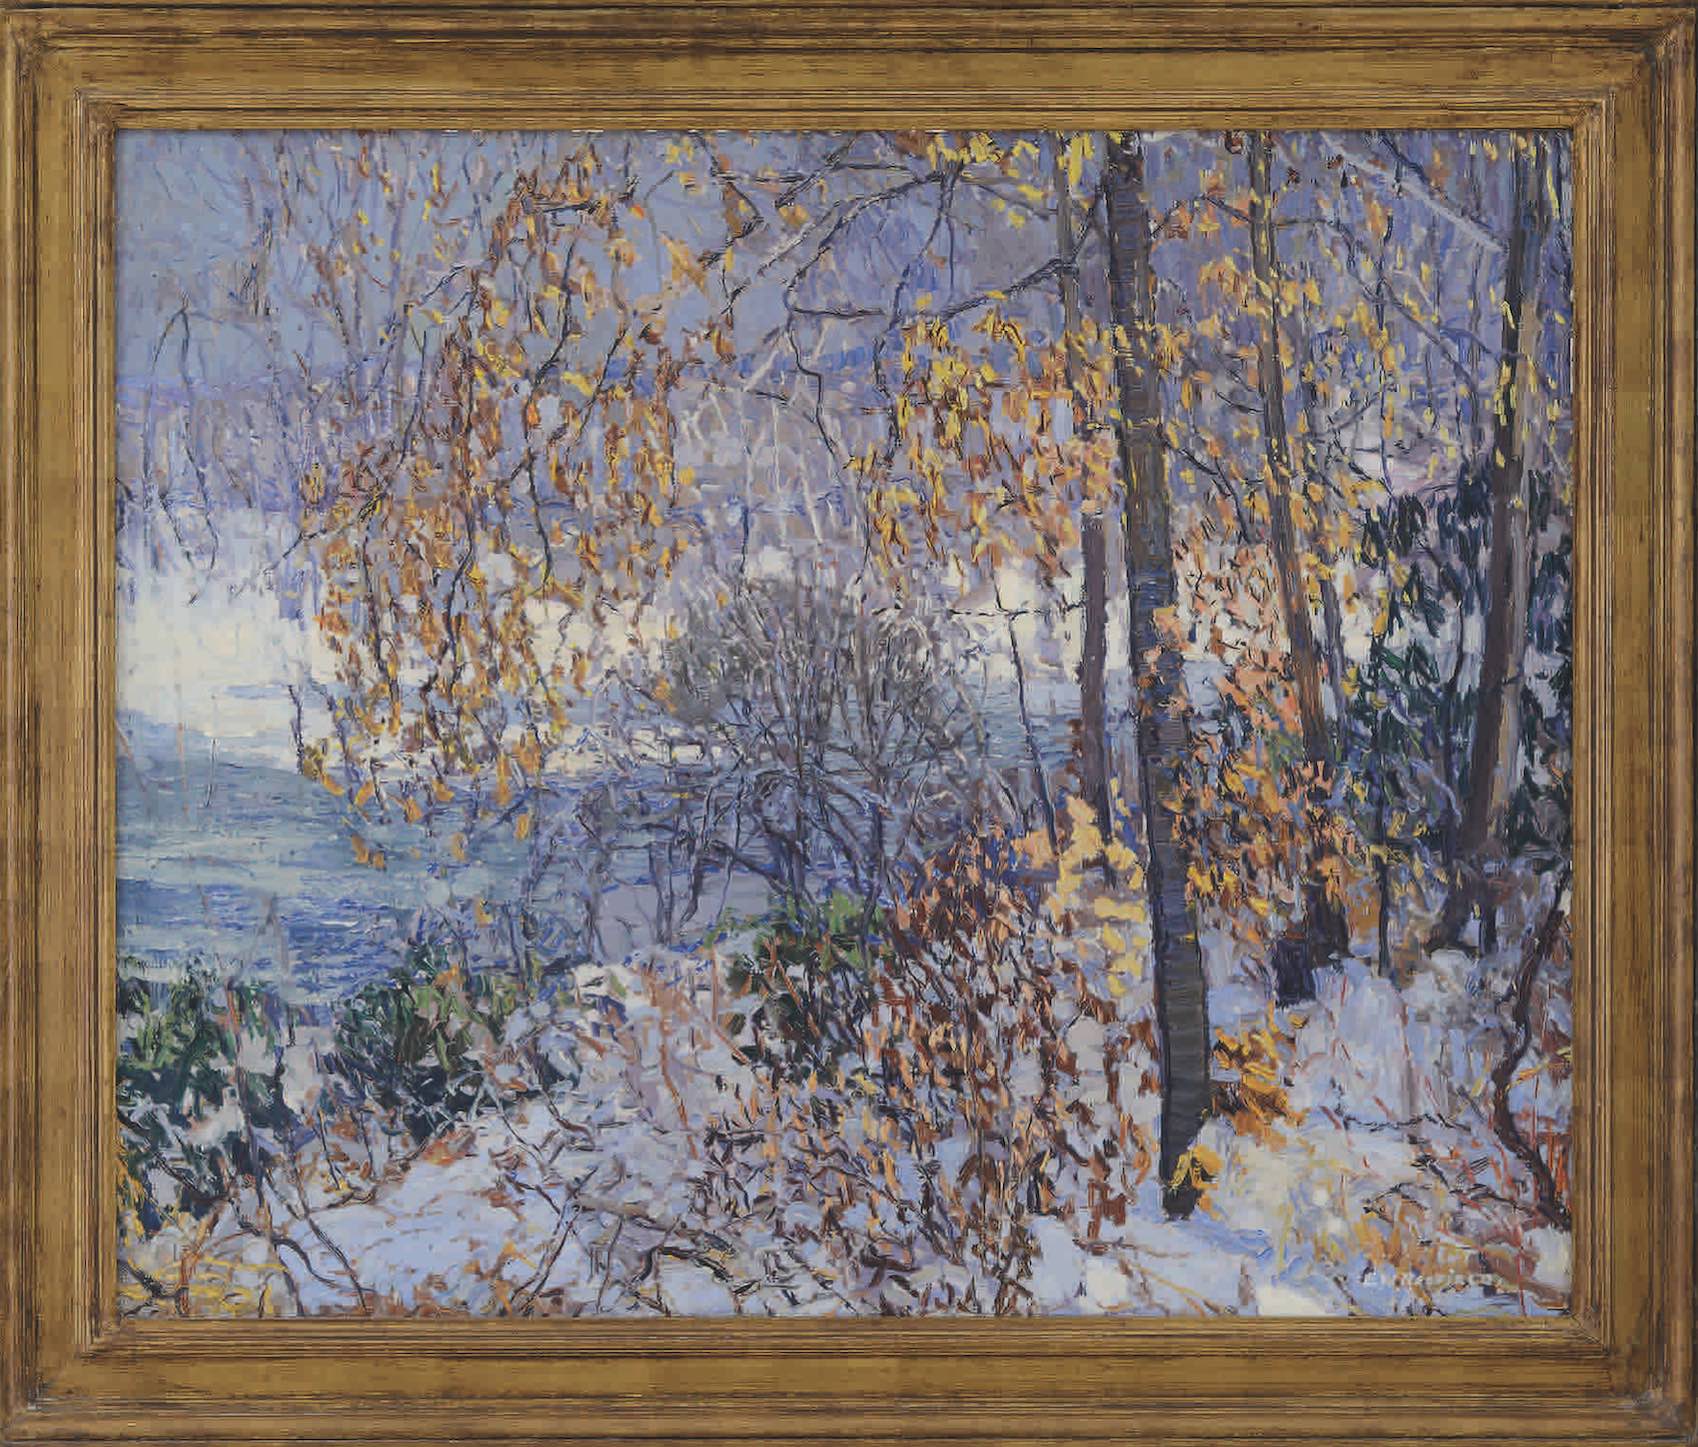 Edward Willis Redfield's "River Decorations" Realized $148,125.